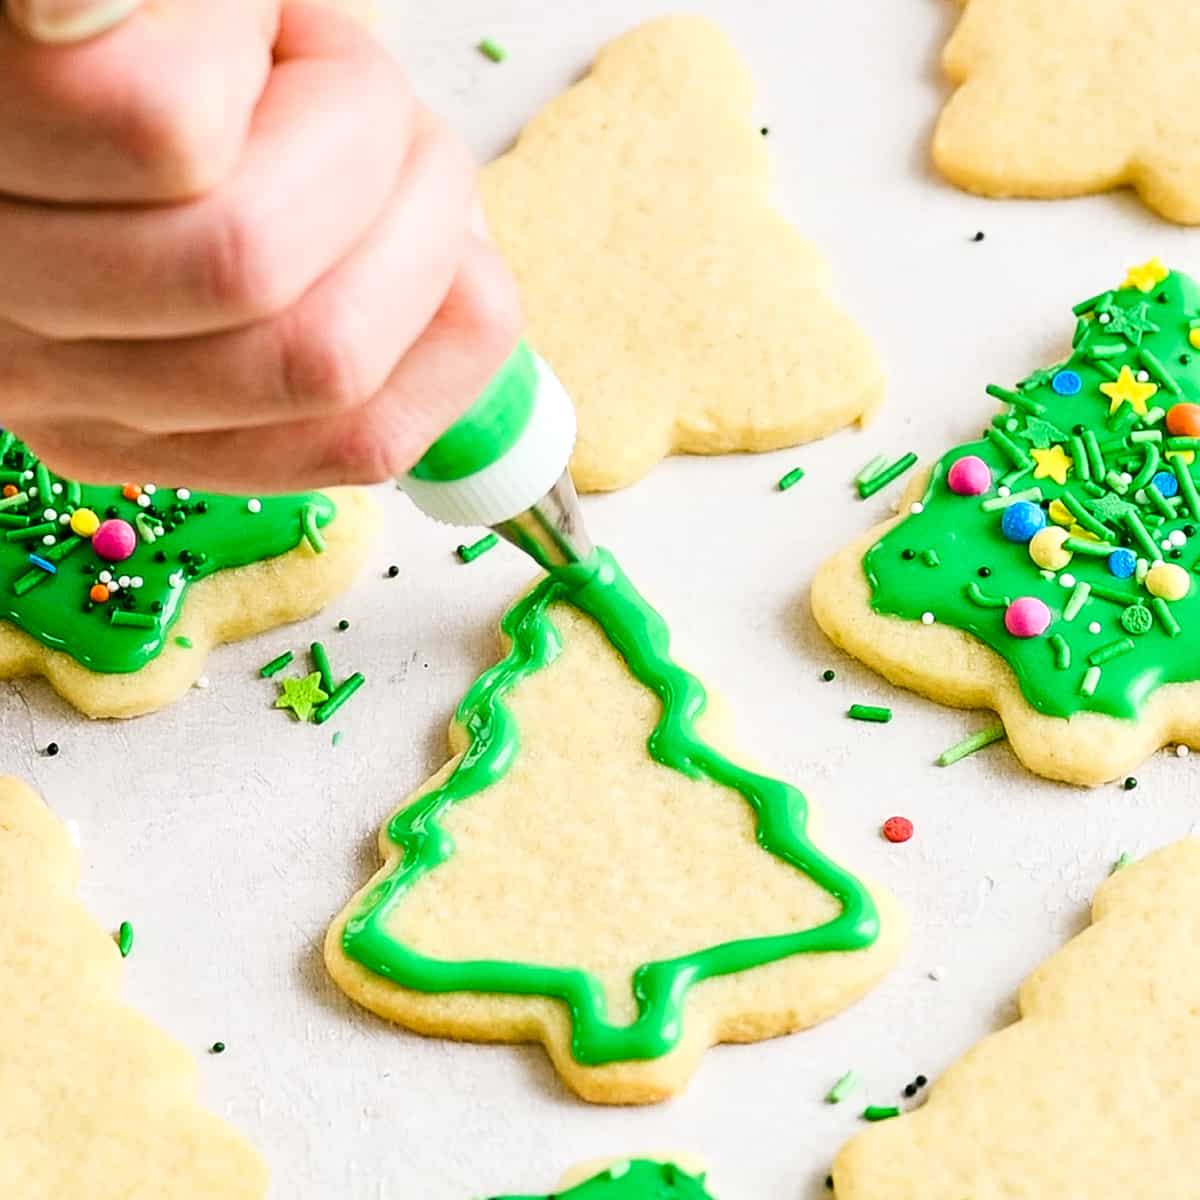 front view of a hand using a decorators bag to put green frosting on a tree-shaped sugar cookie